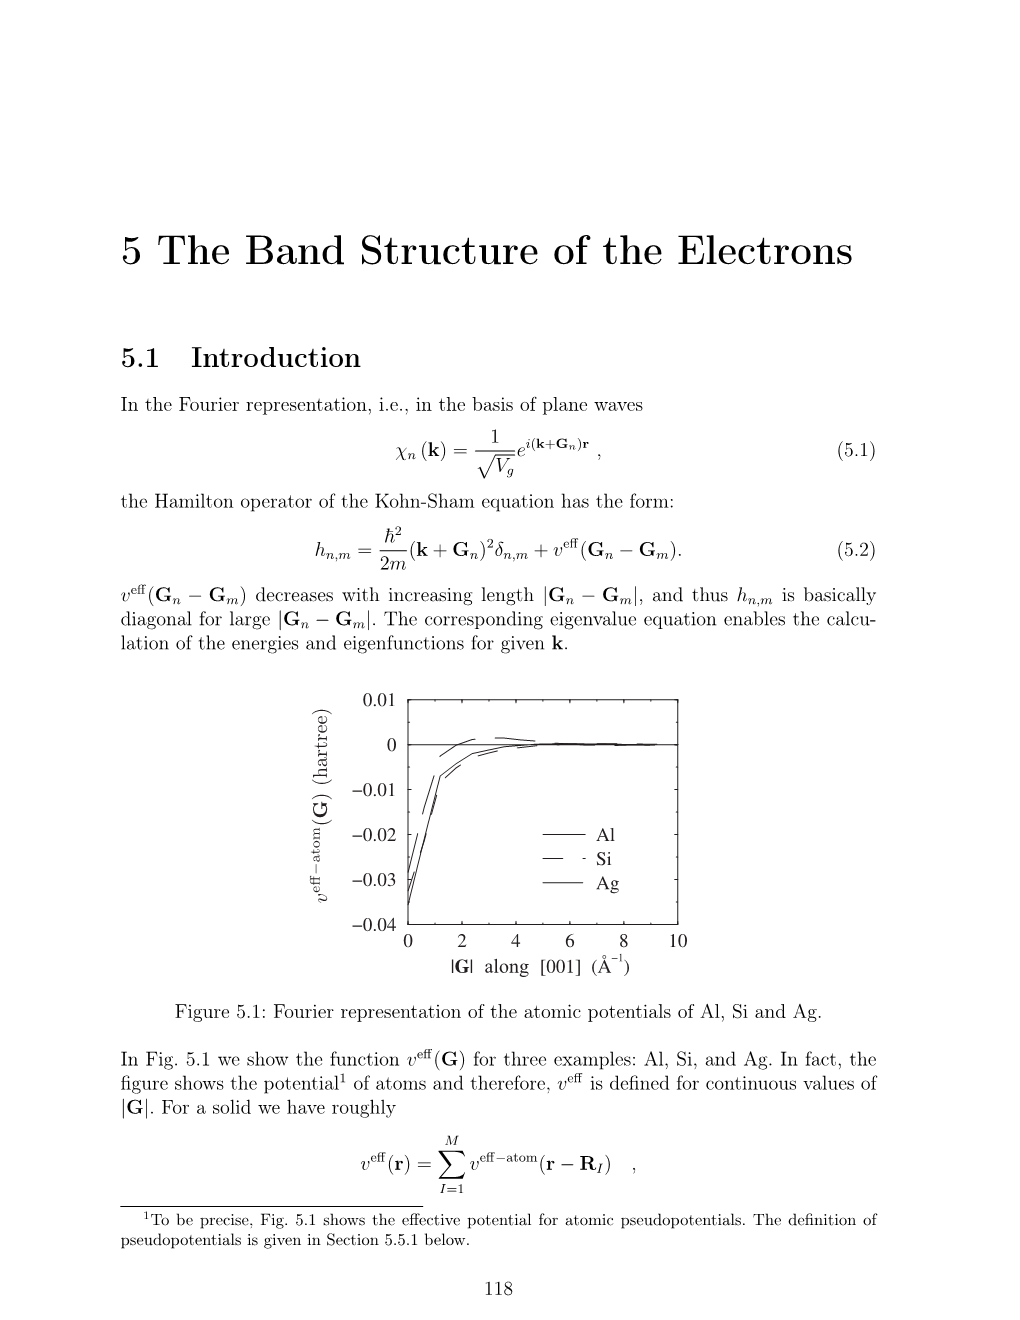 5 the Band Structure of the Electrons